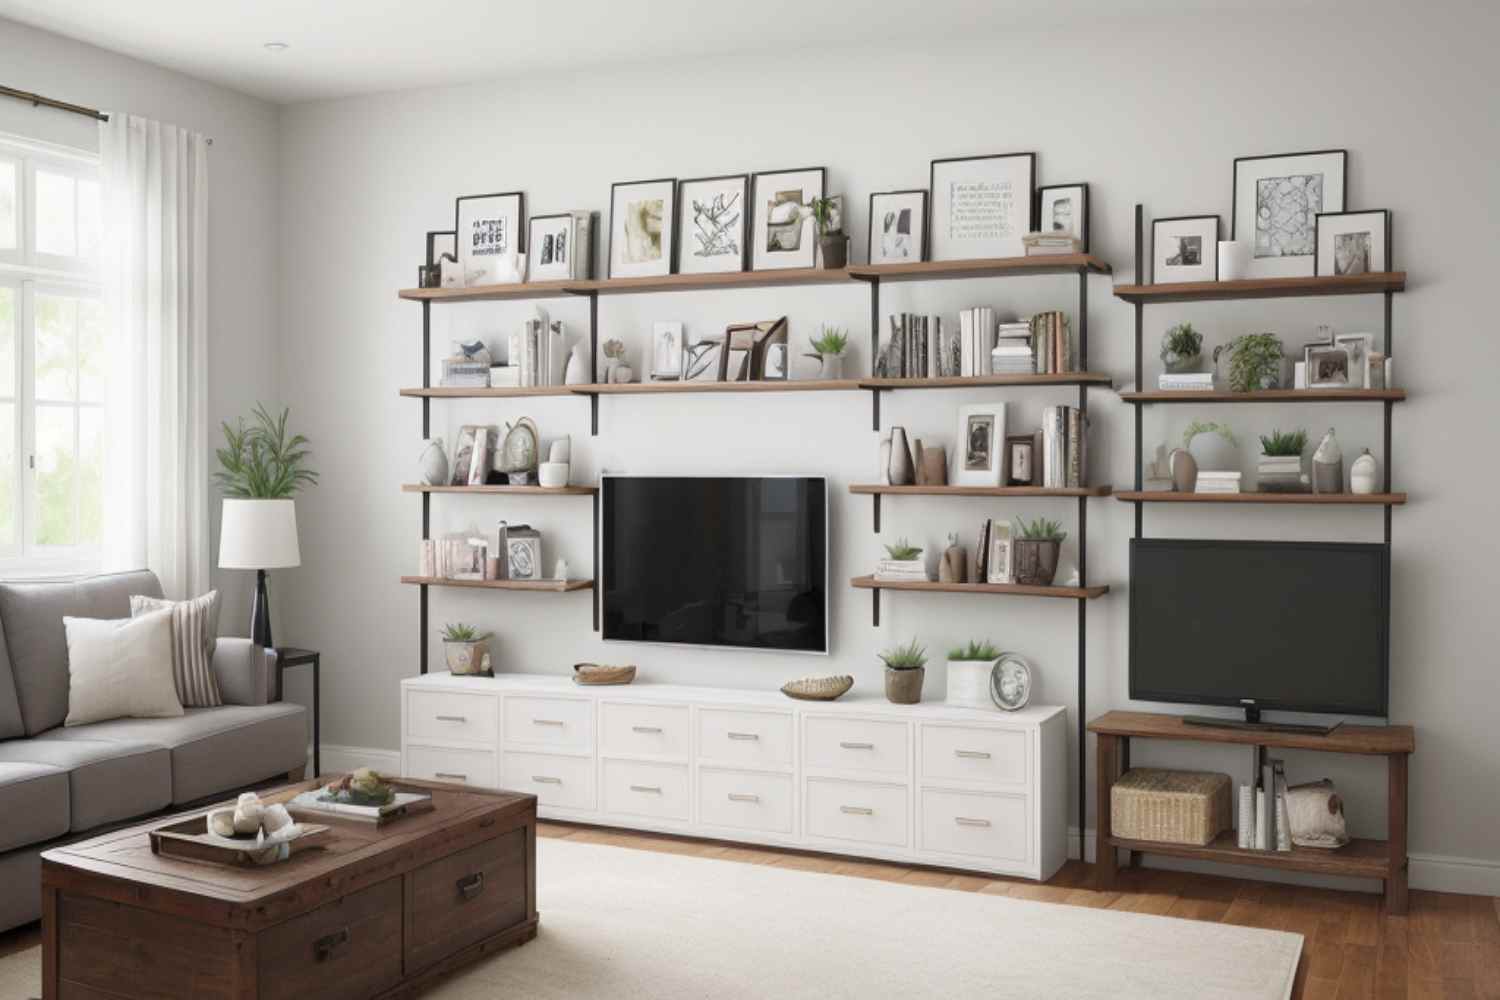 Best Living Room Wall Decor Ideas To Wake Up Blank Walls